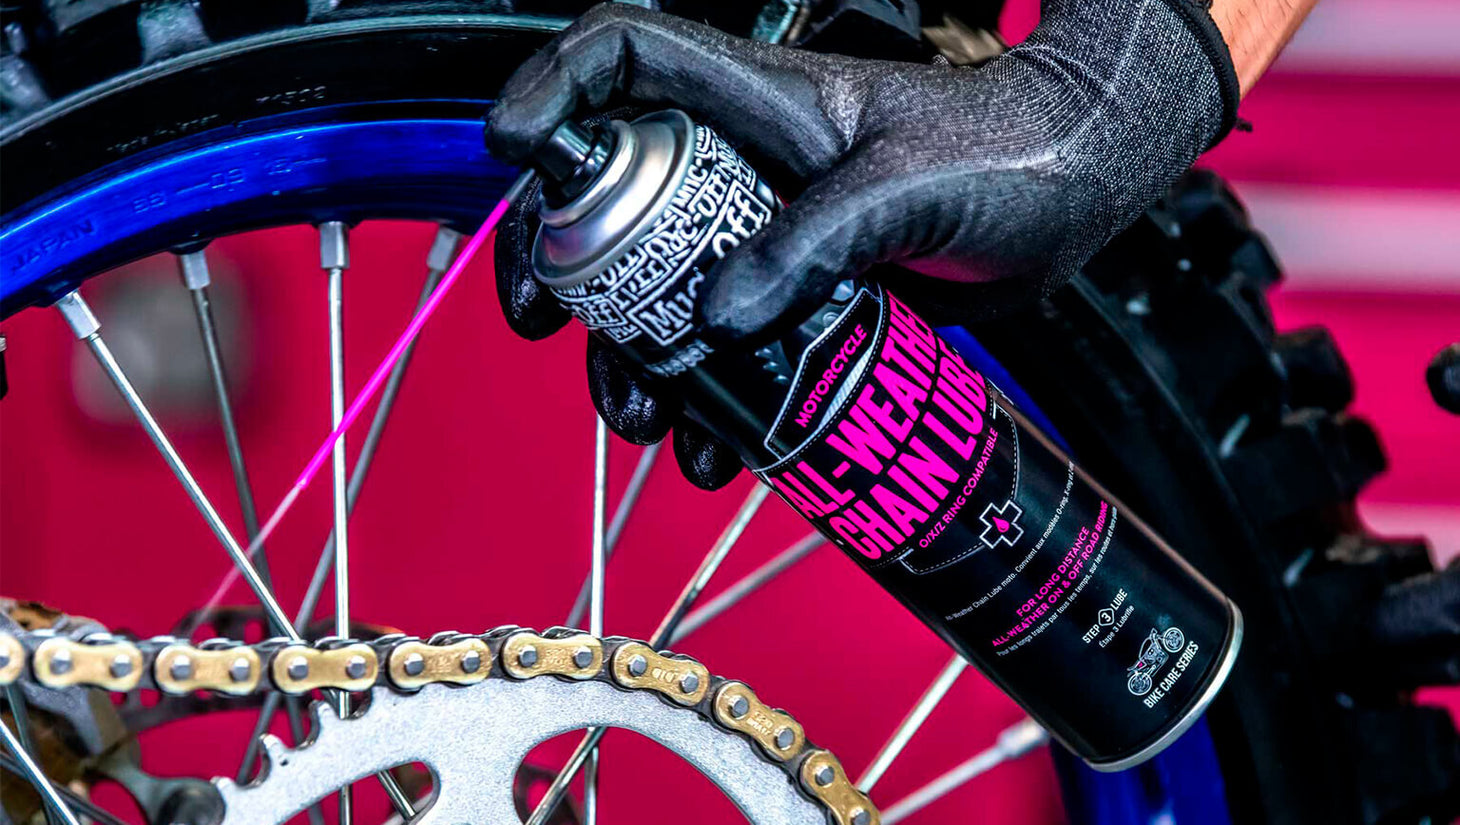 Why Clean, Protect & Lube a Motorcycle? – Muc-Off UK